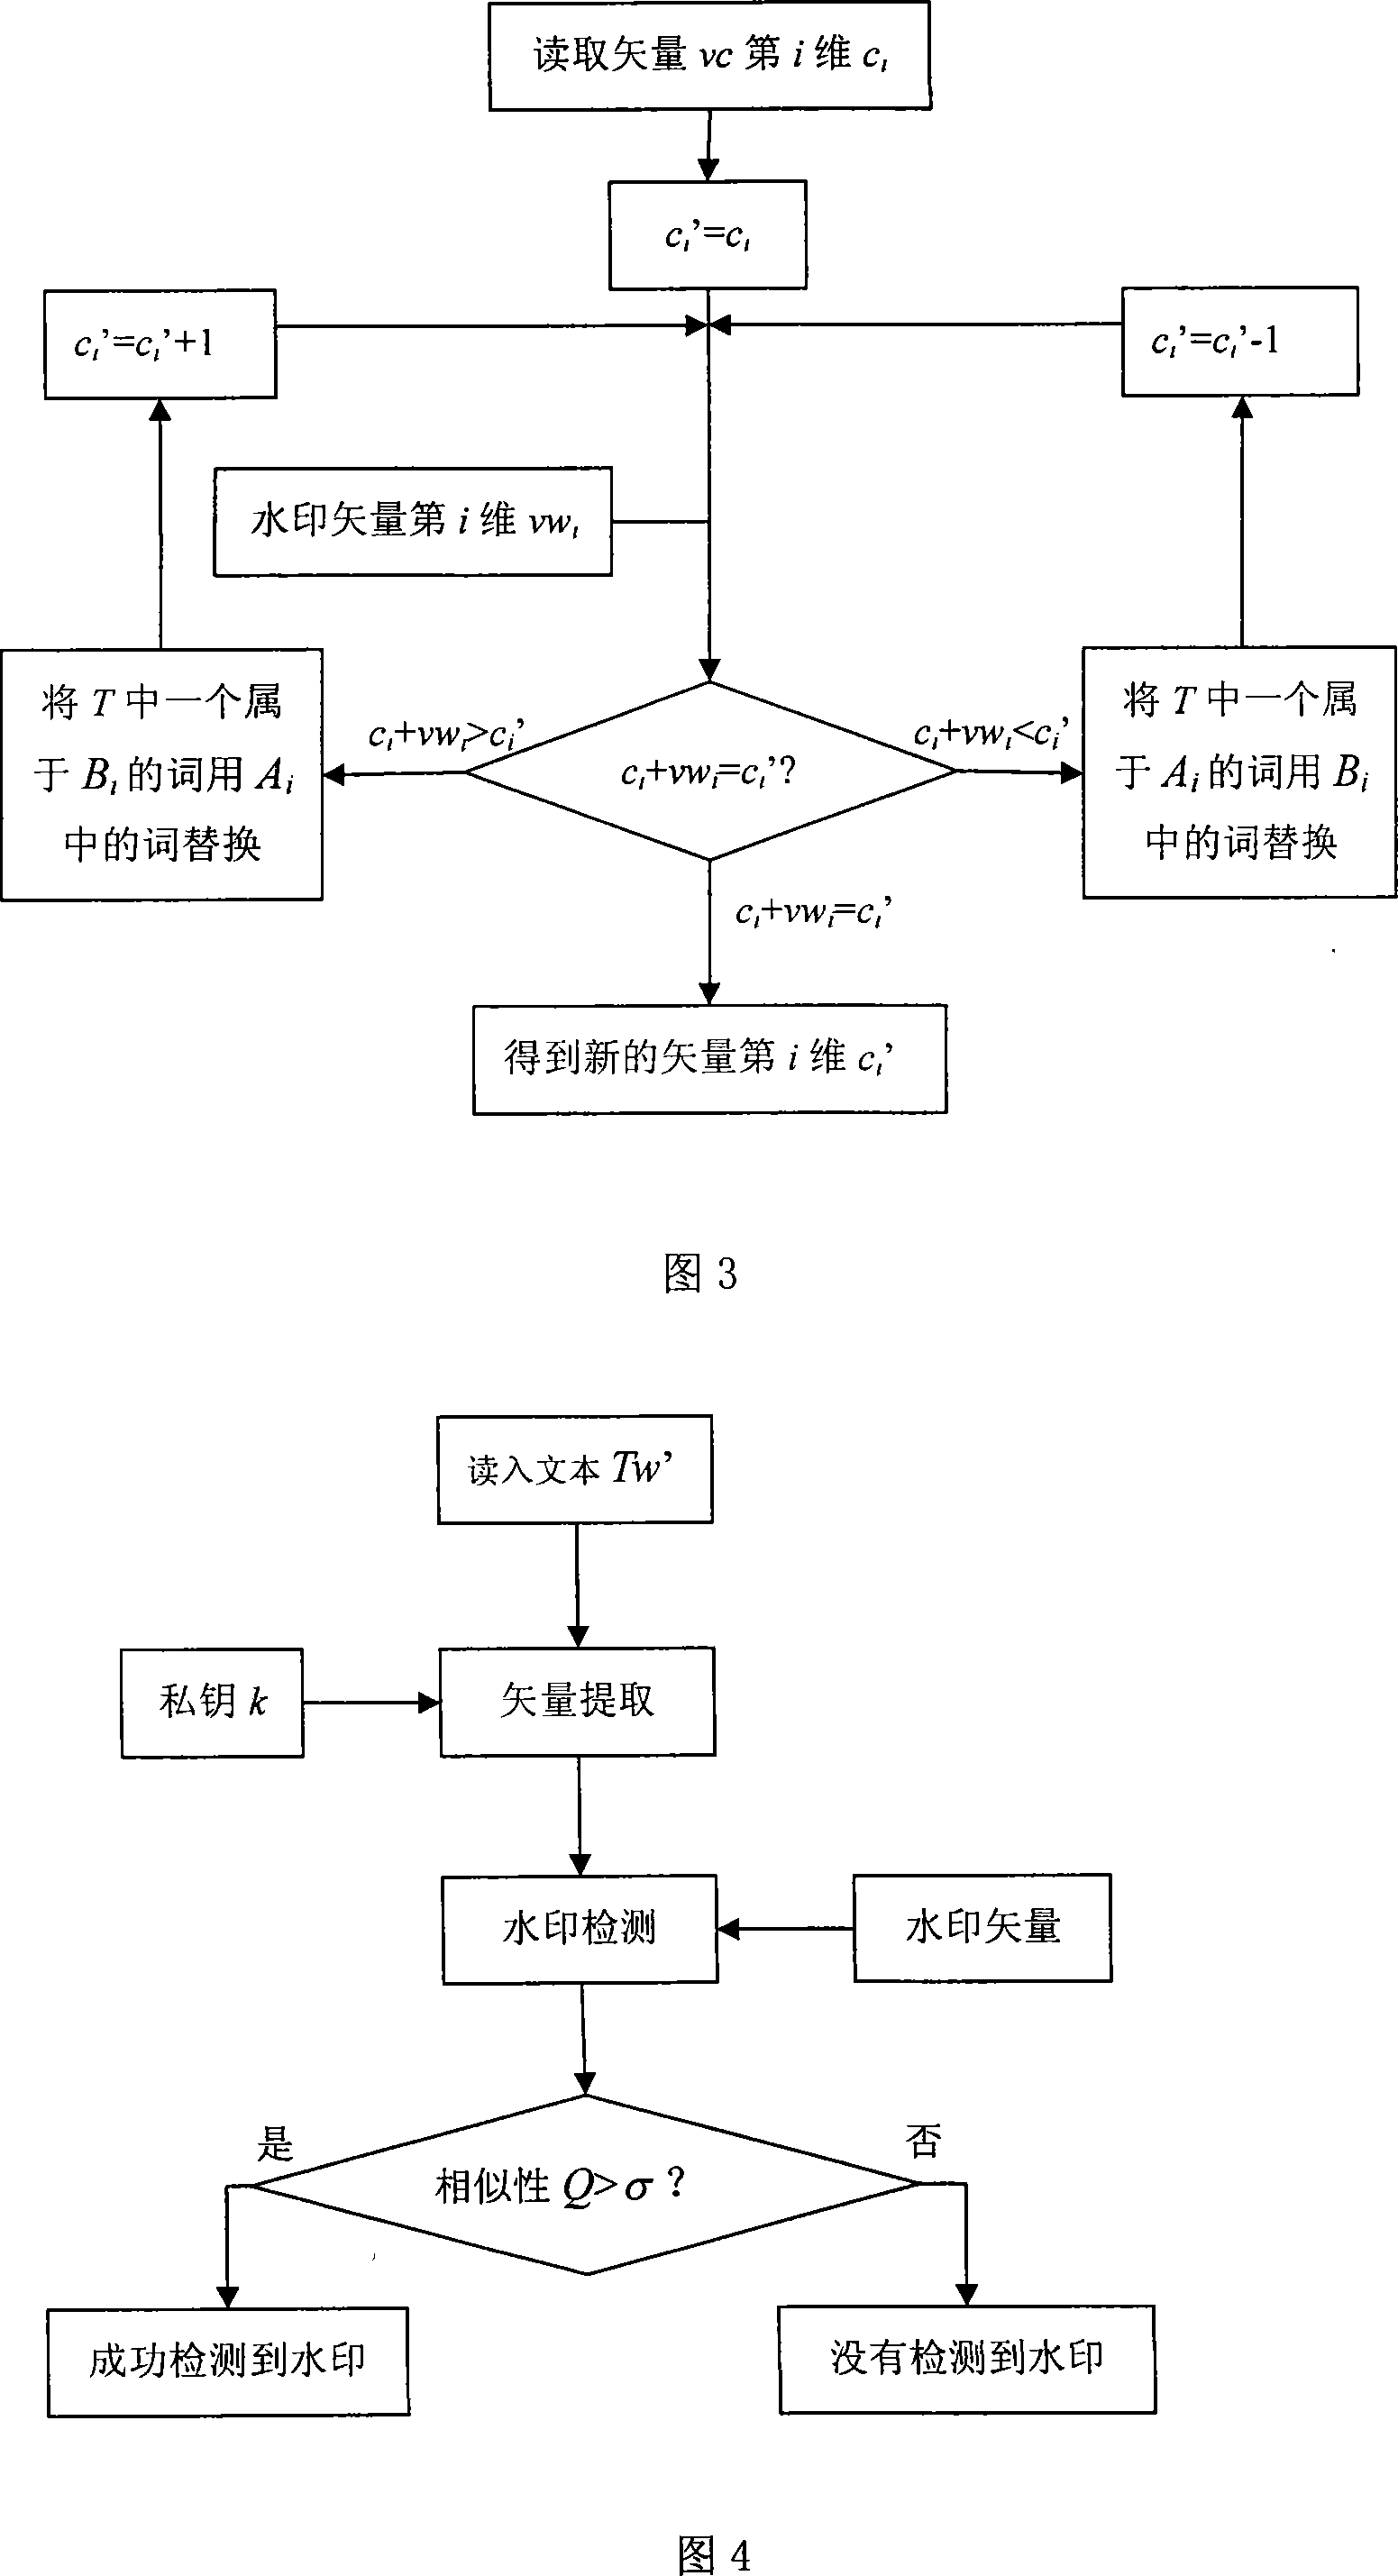 Method for embedding and extracting frequency domain water mark in English text